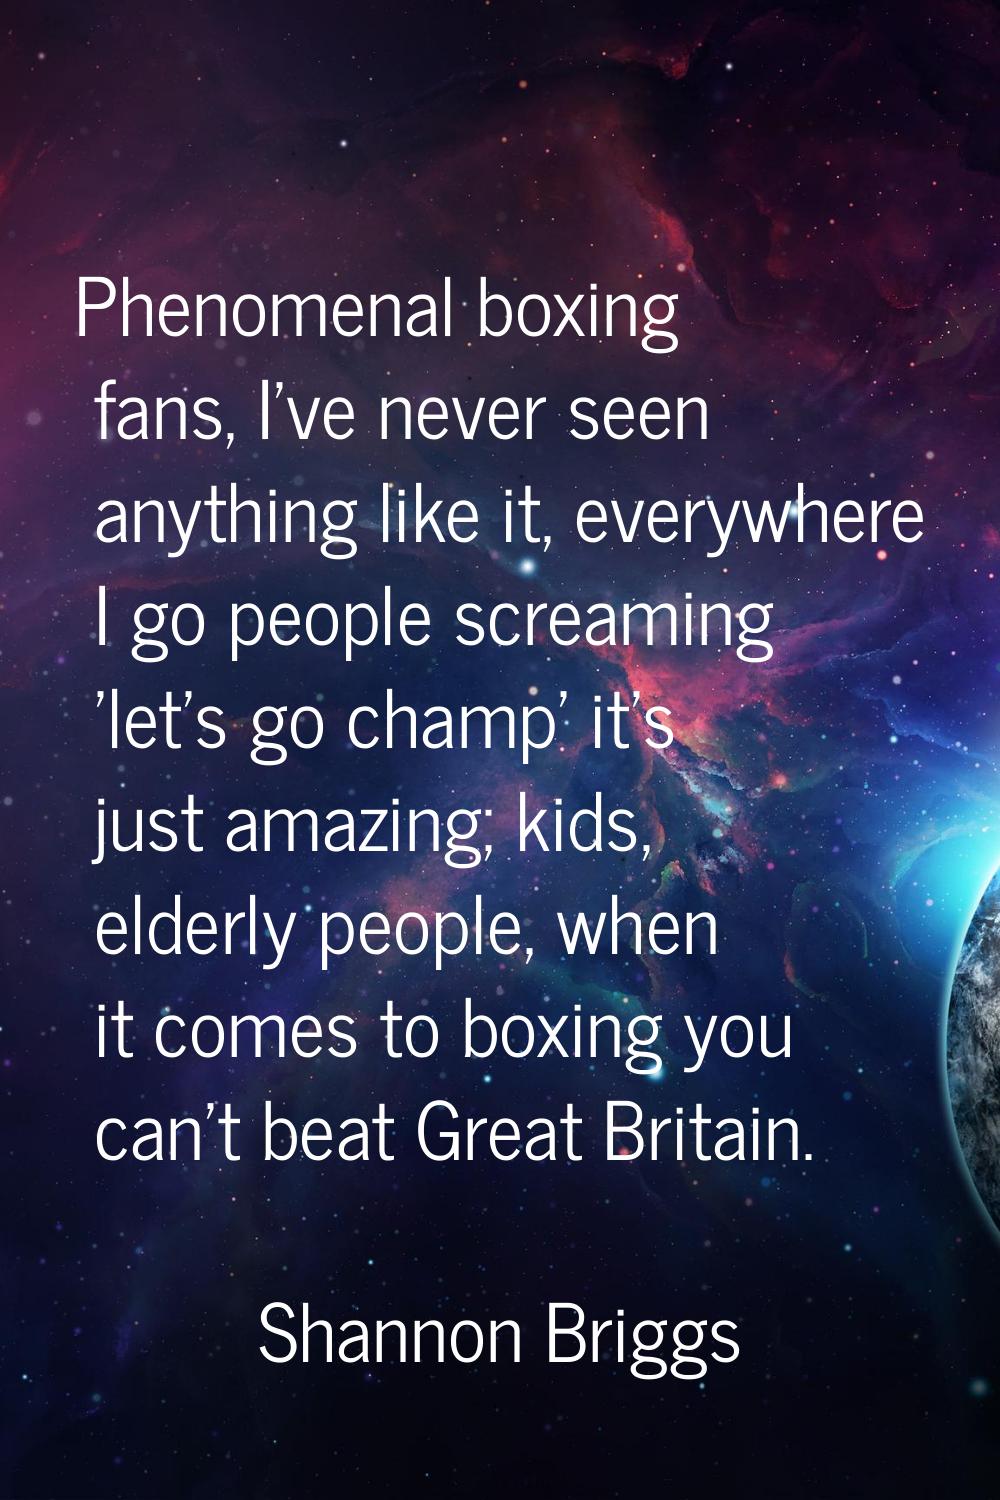 Phenomenal boxing fans, I've never seen anything like it, everywhere I go people screaming 'let's g